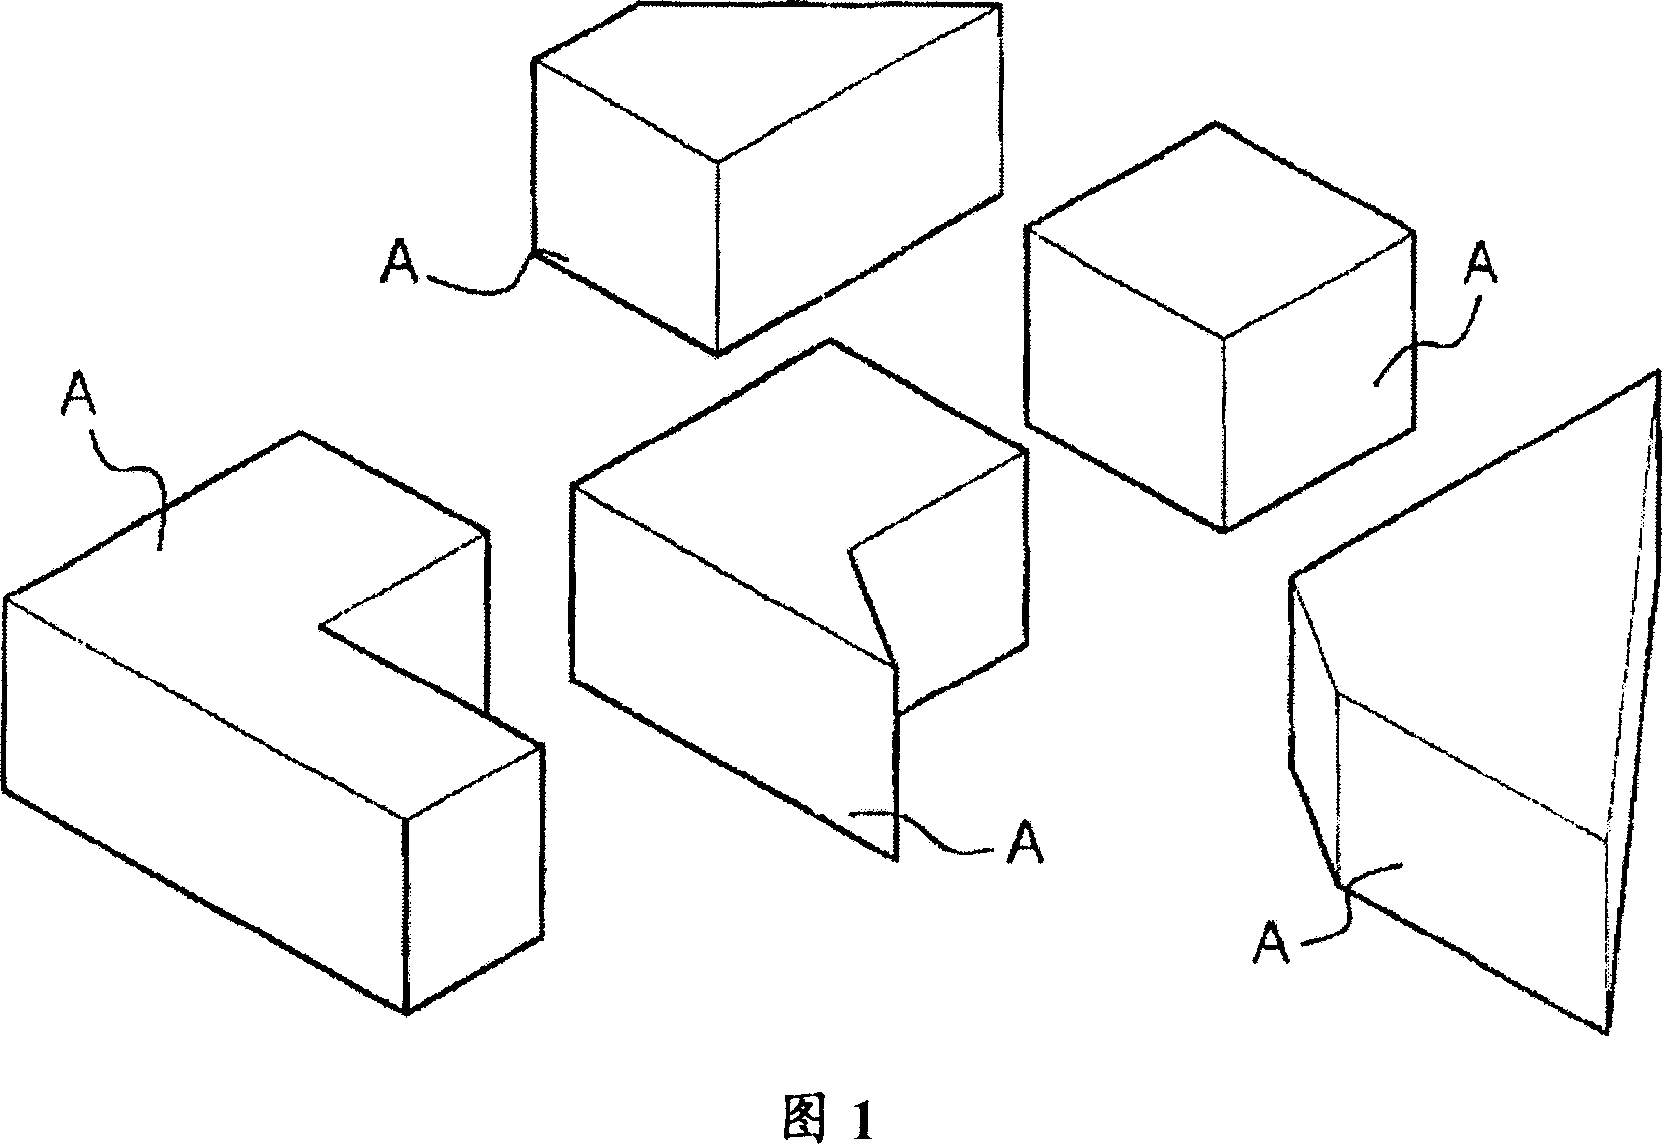 The solid puzzle block